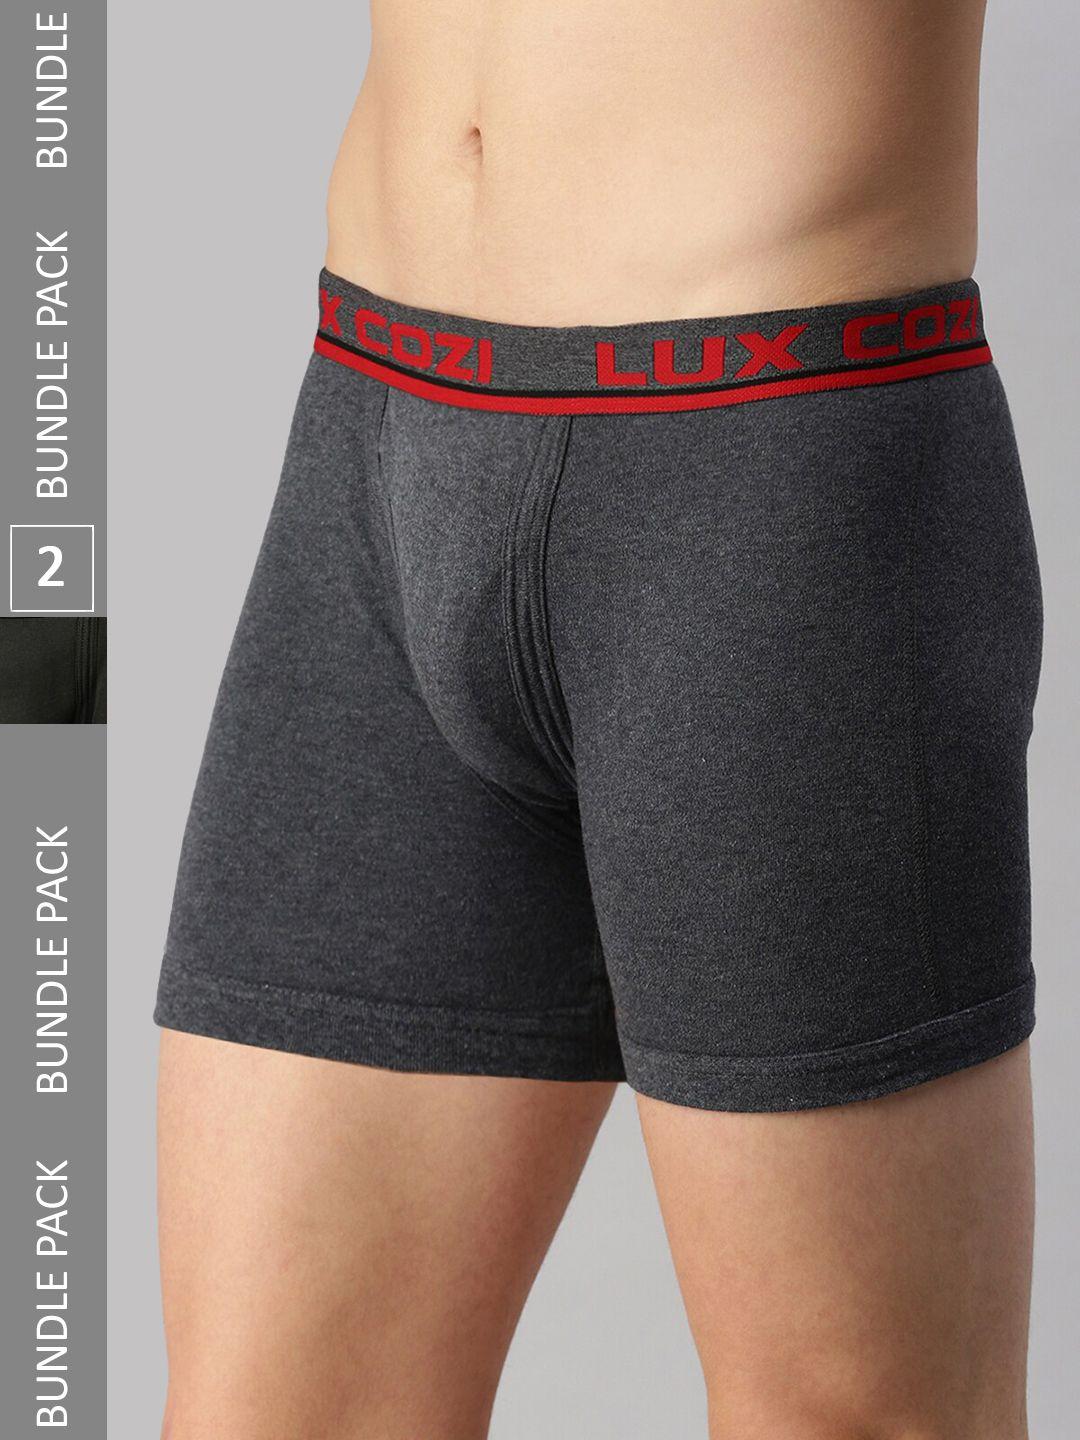 lux cozi men pack of 2 cotton mid-rise trunks